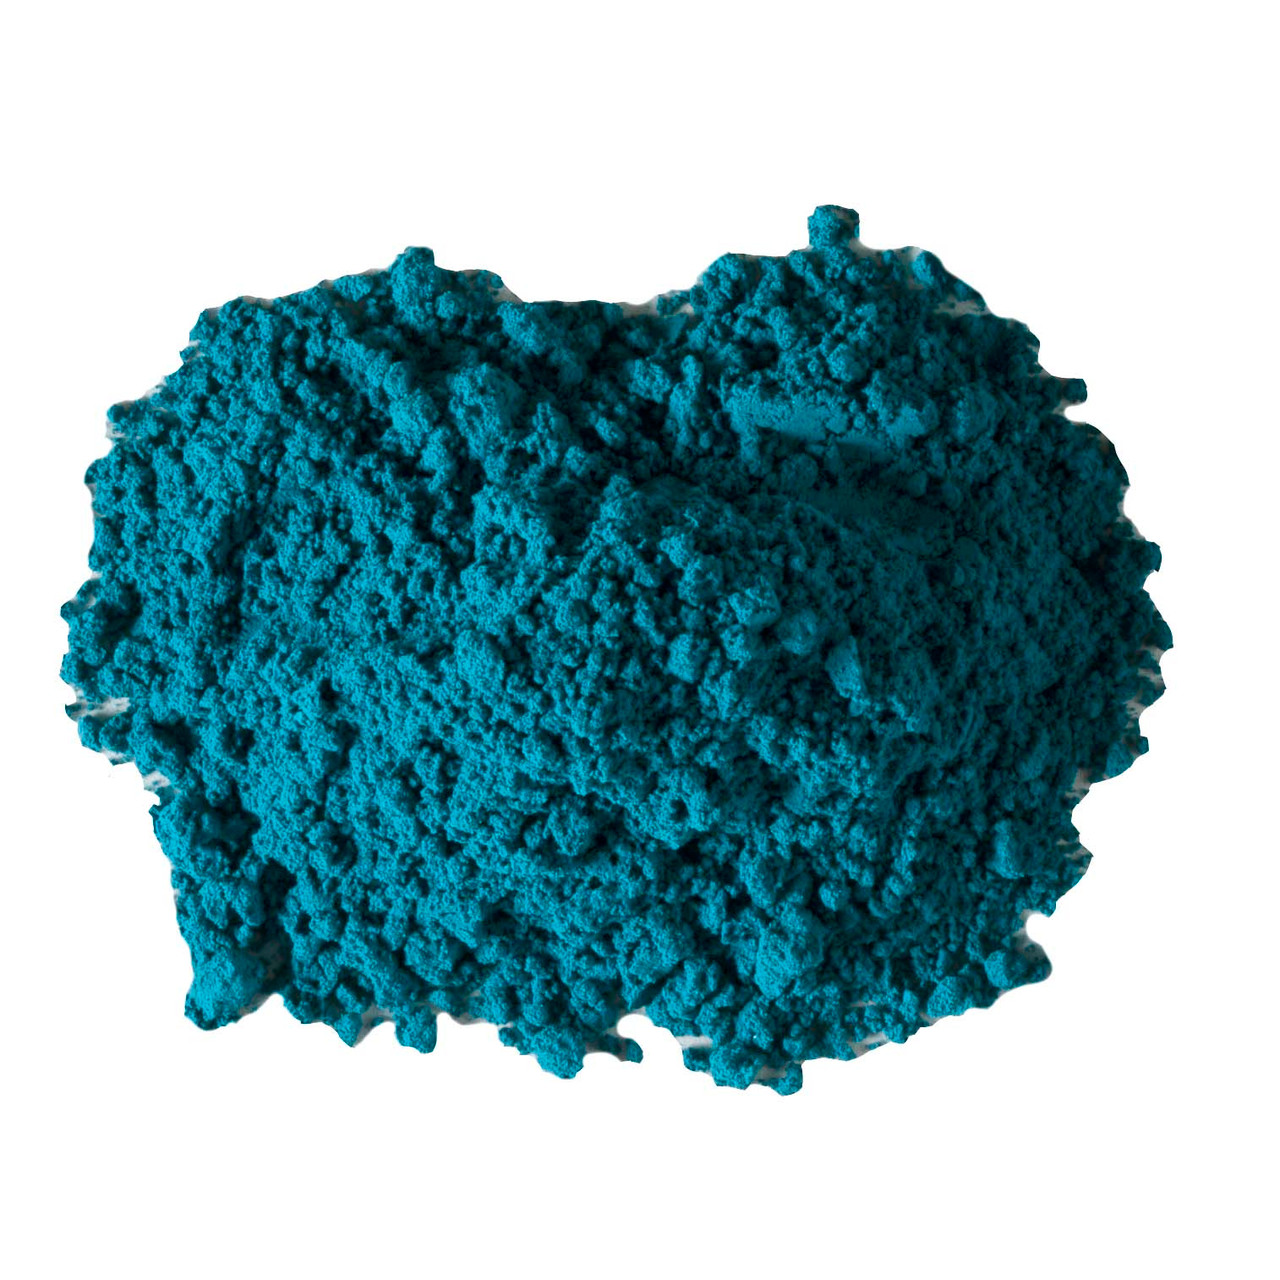 How to Use Powder Pigments - The Earth Pigments Company, LLC